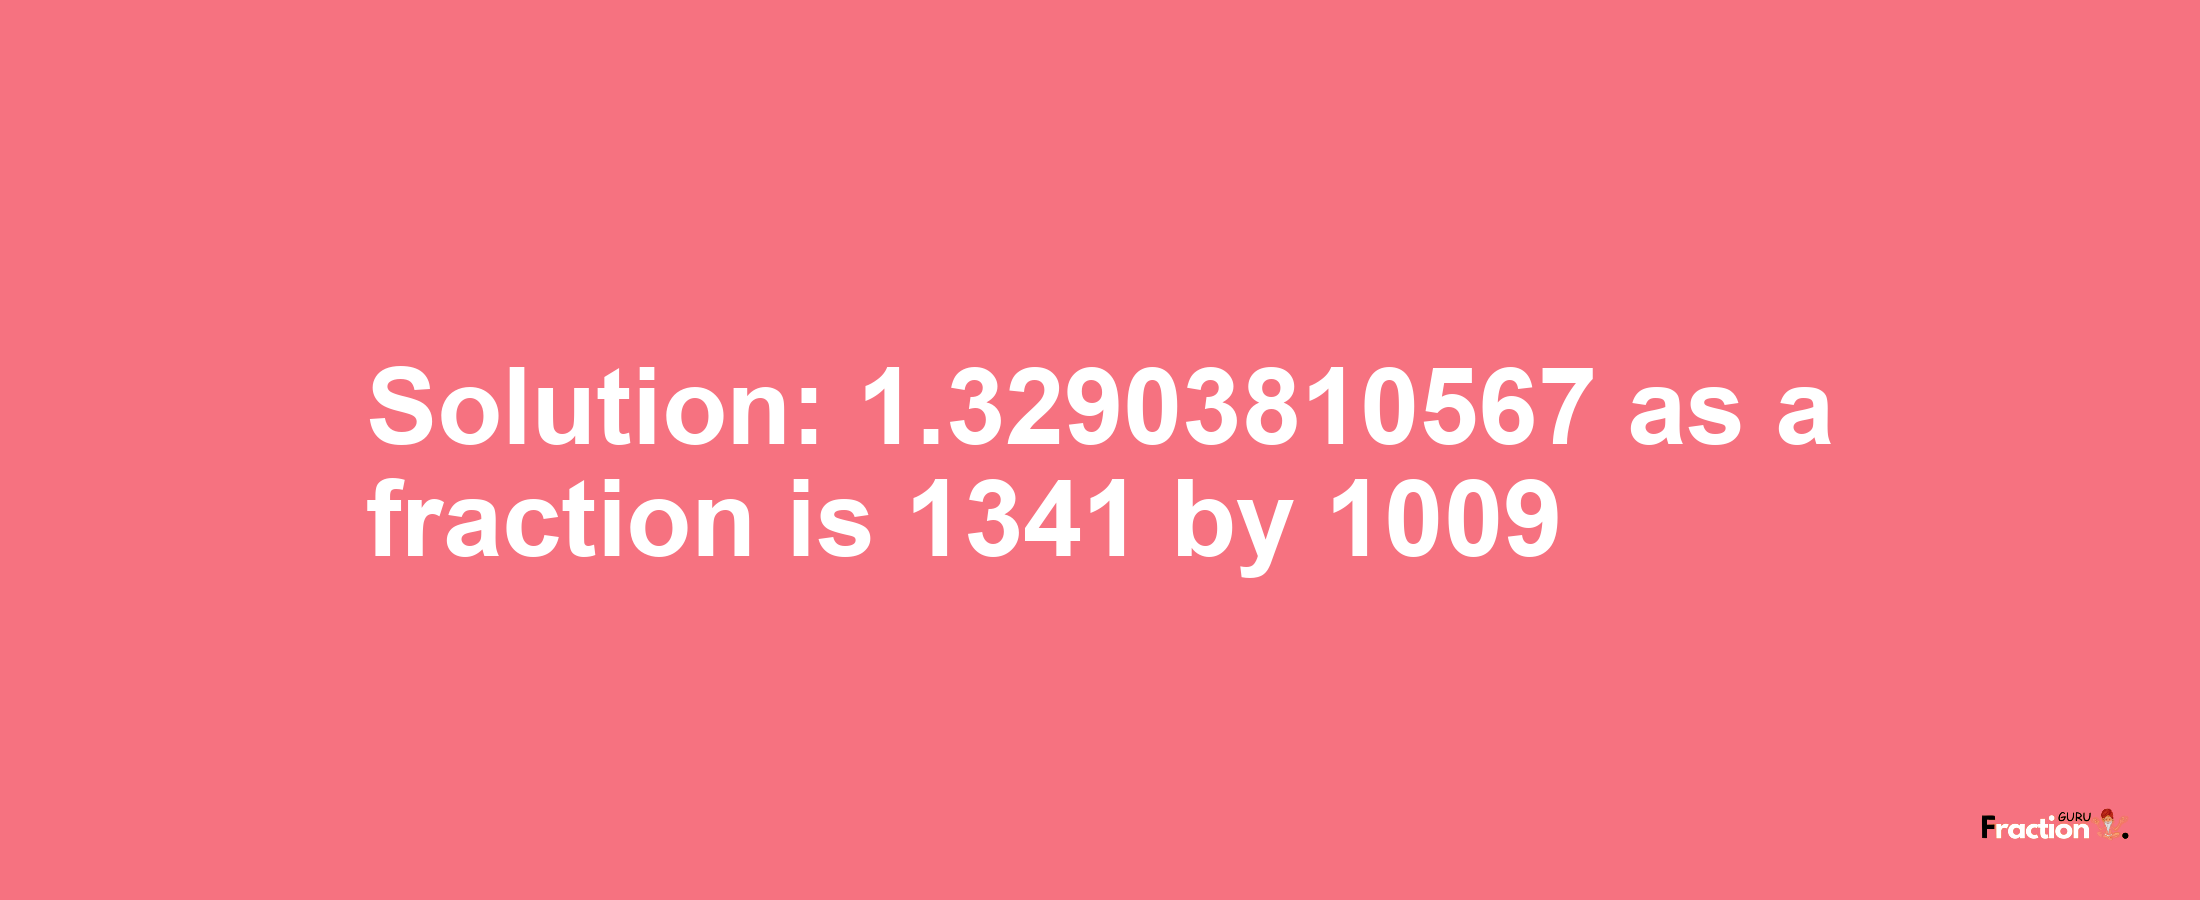 Solution:1.32903810567 as a fraction is 1341/1009